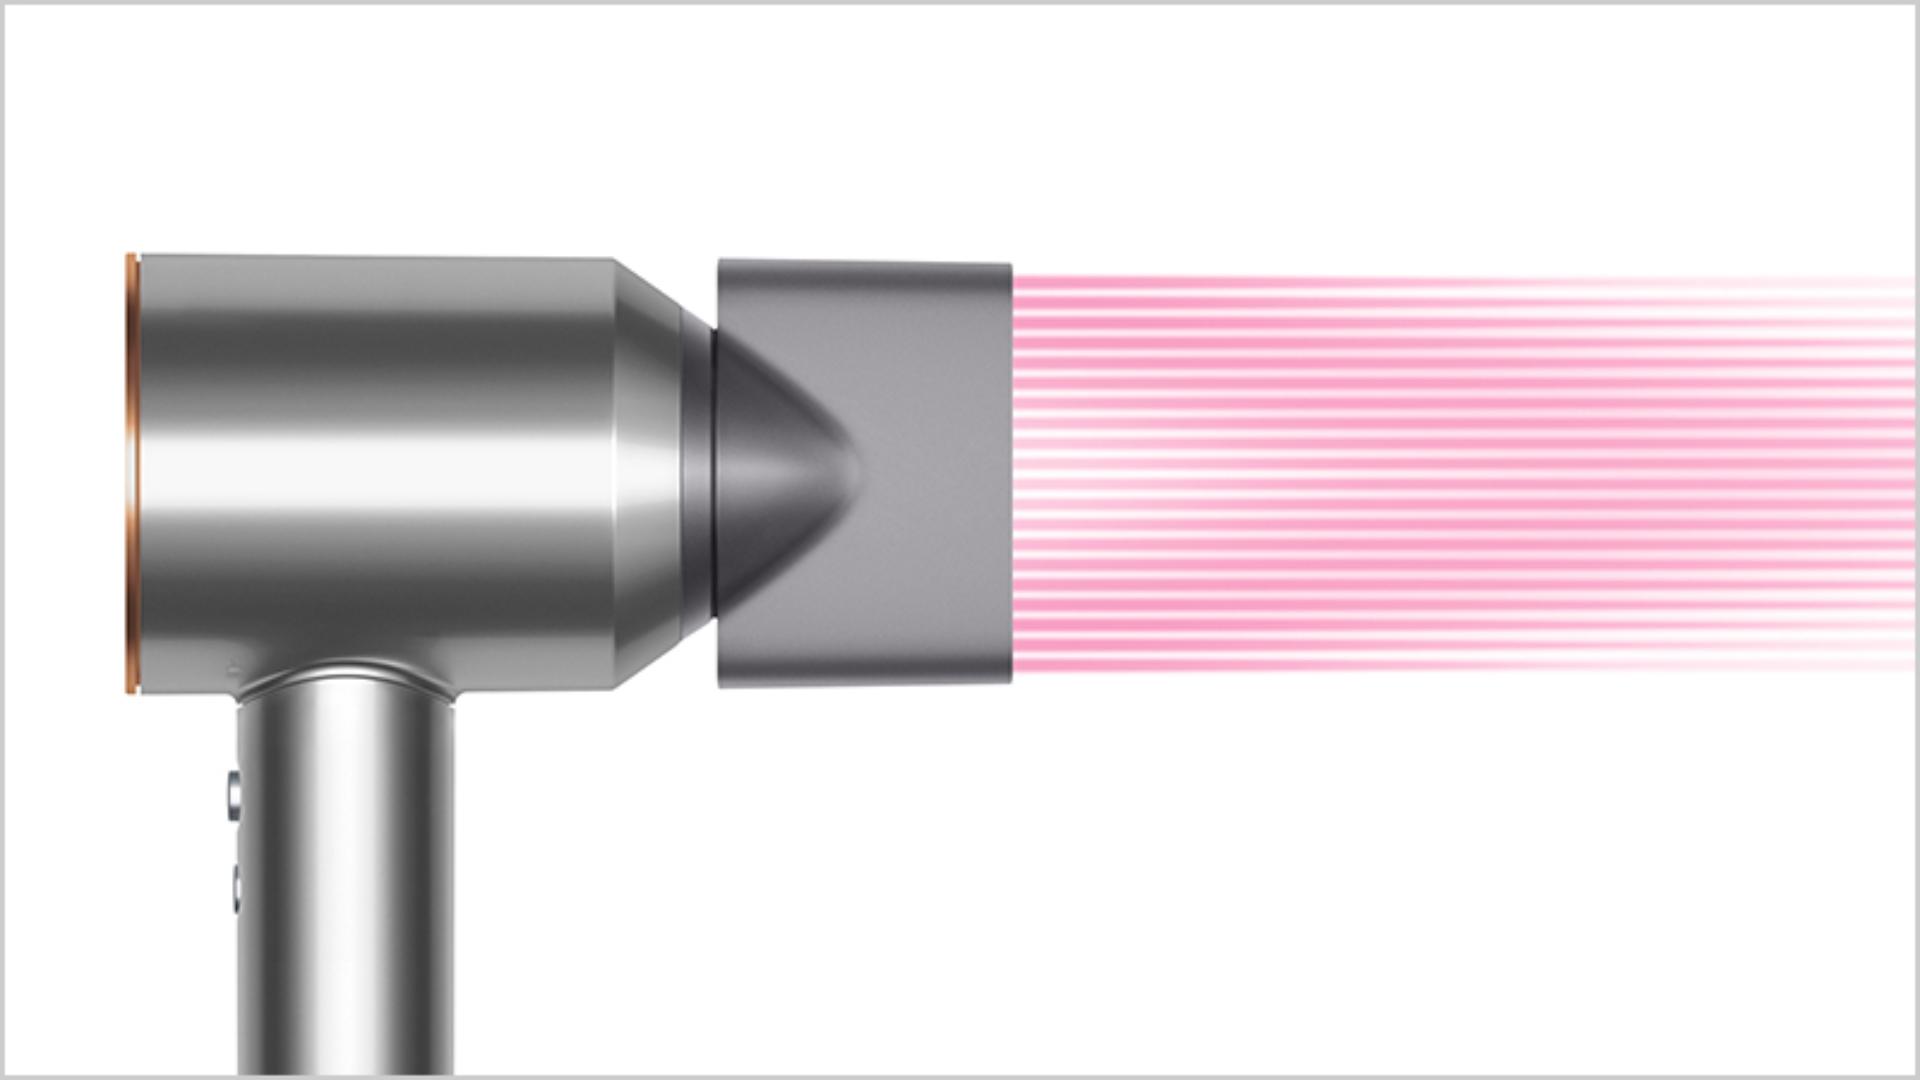 Side view of the Dyson Supersonic with Styling concentrator attachment.